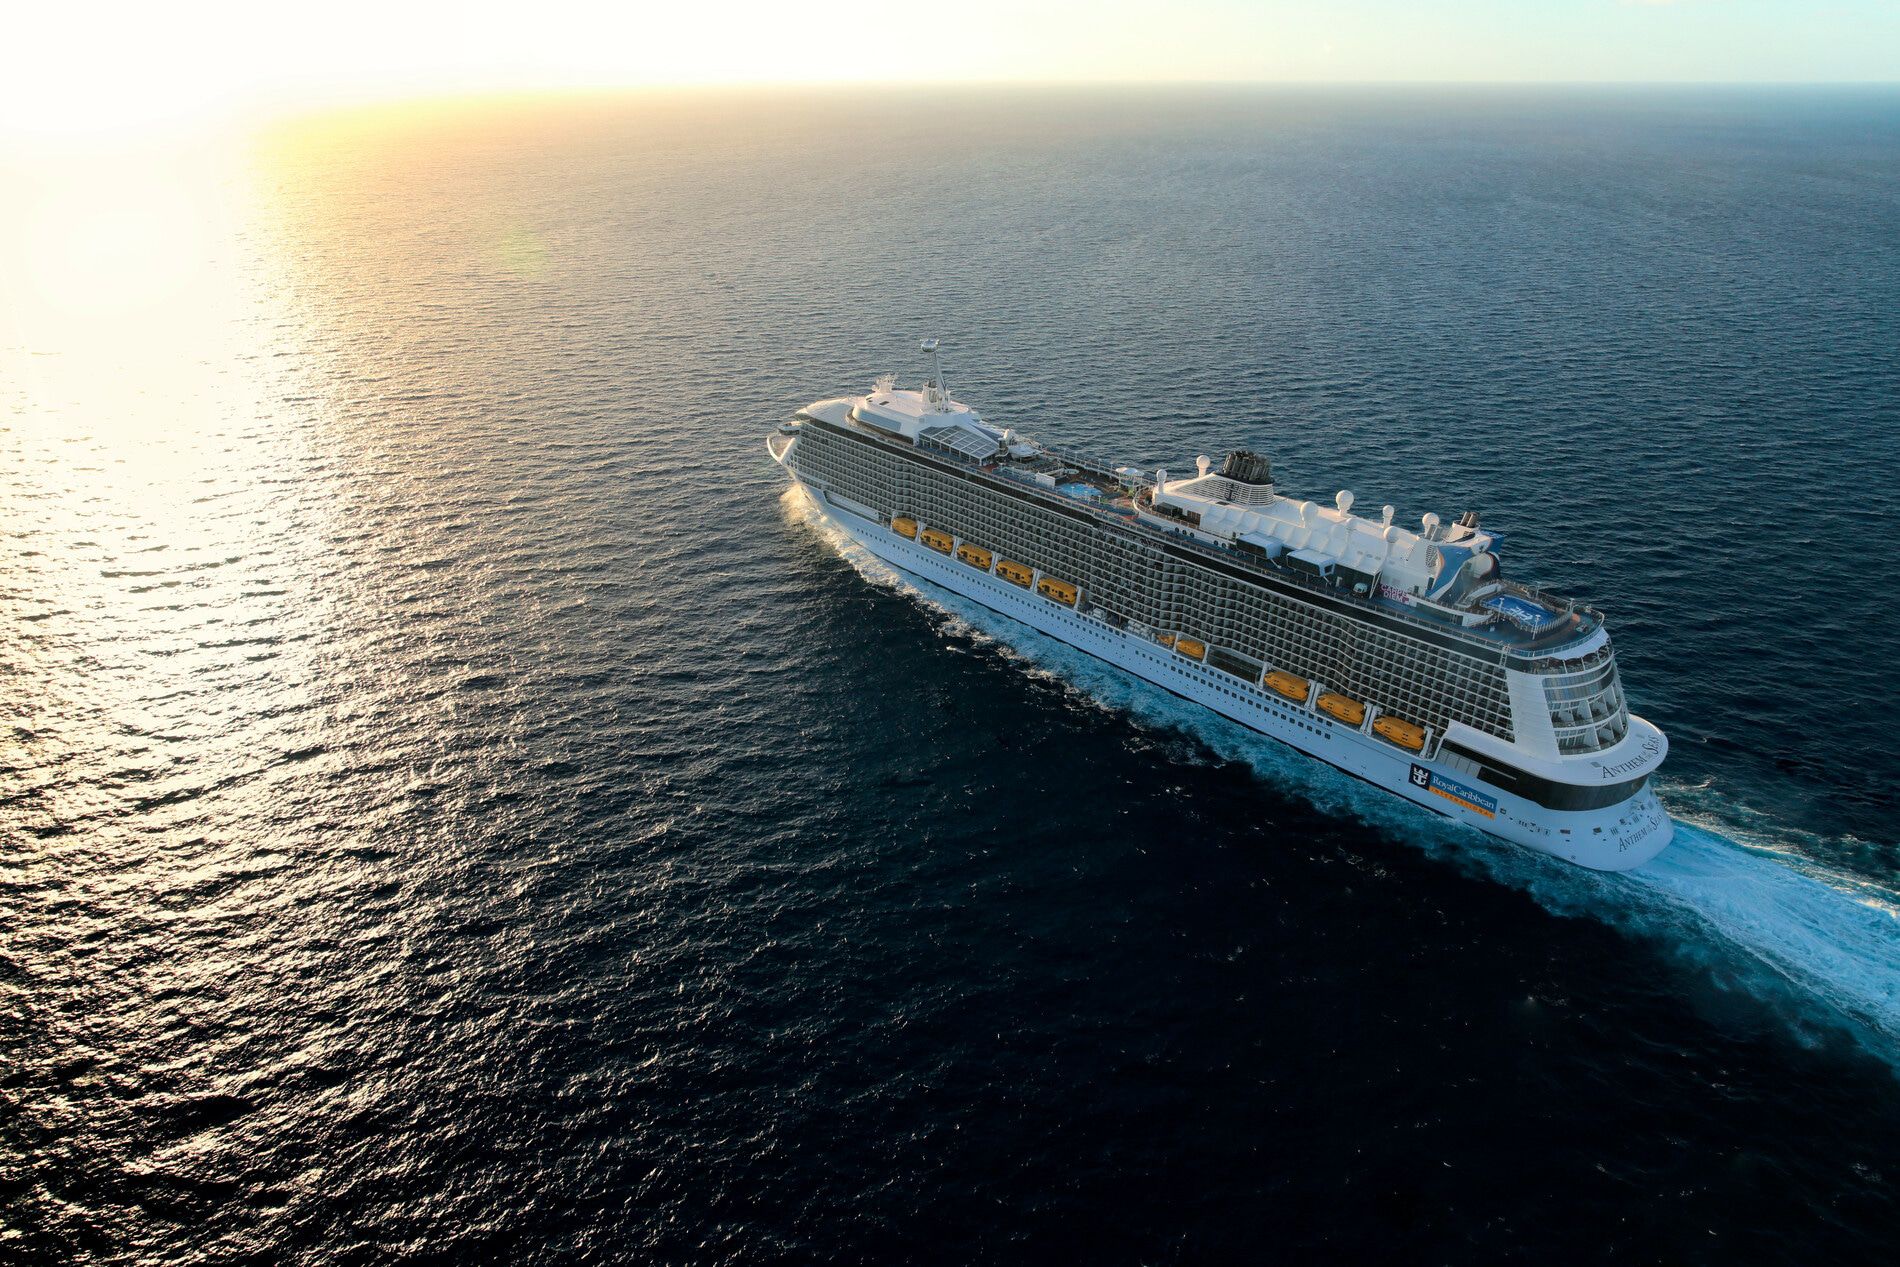 A photo of the Anthem of the Seas cruise ship